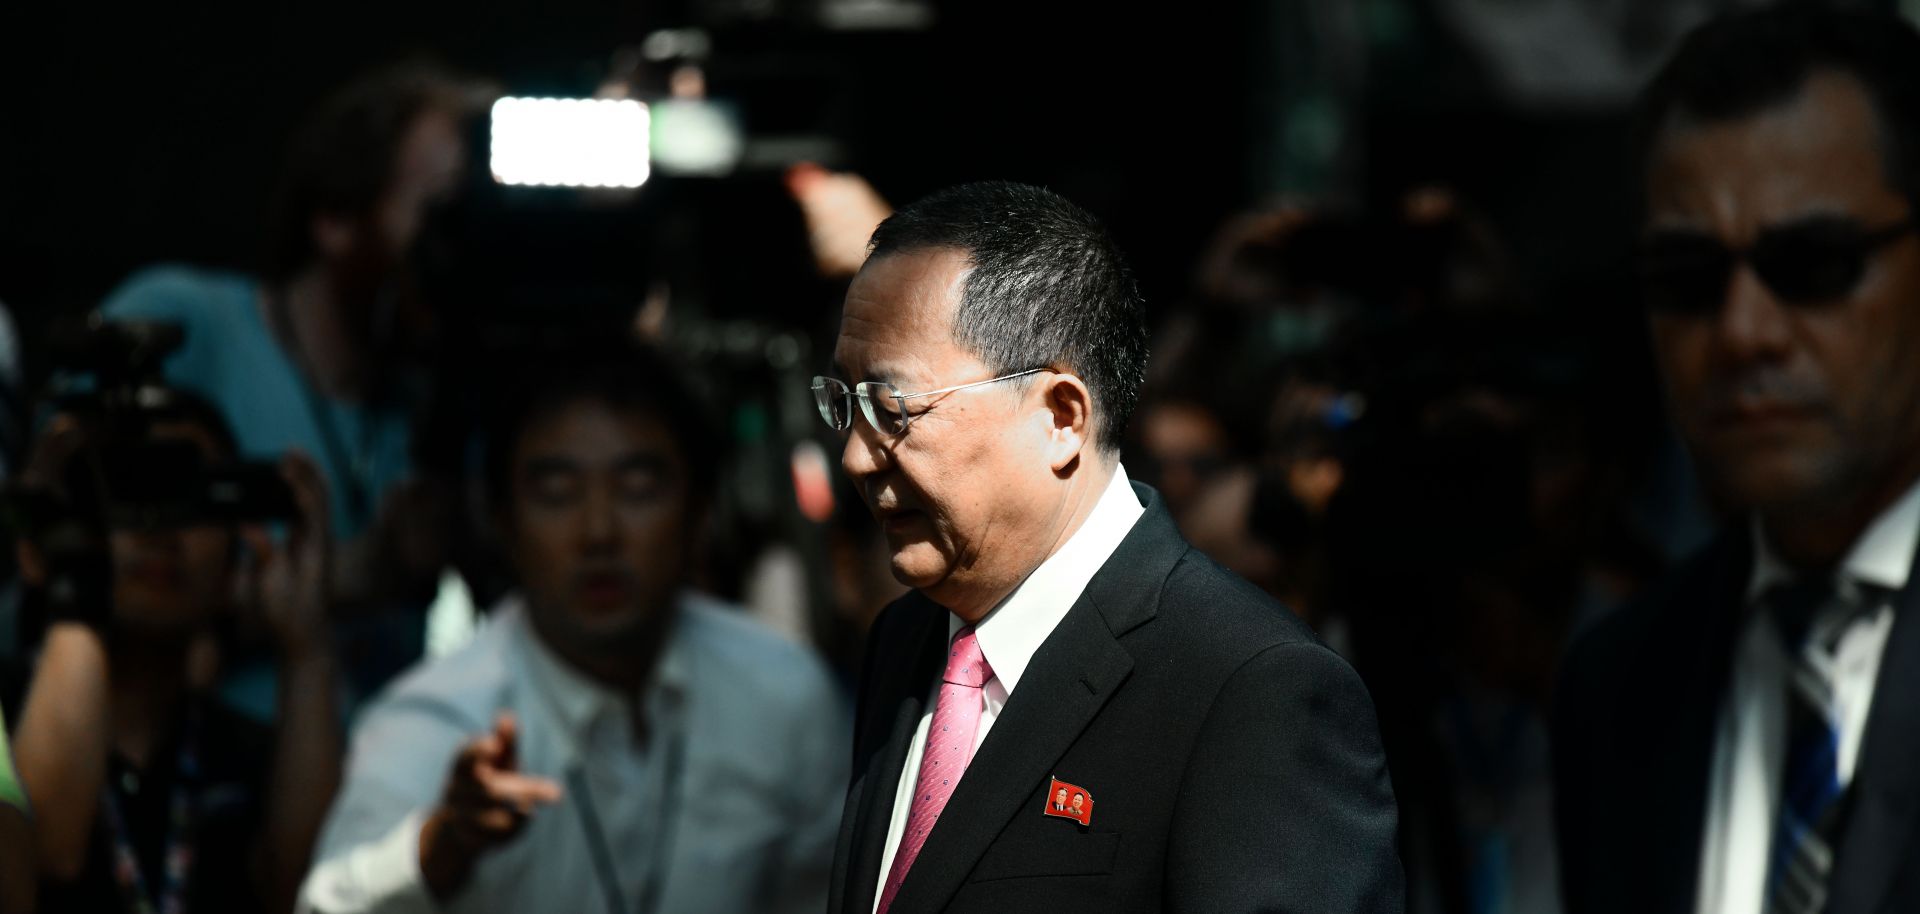 North Korean Foreign Minister Ri Su Yong leaves his hotel in New York on Sept. 25, headed to a news conference in which he accused the United States of declaring war.